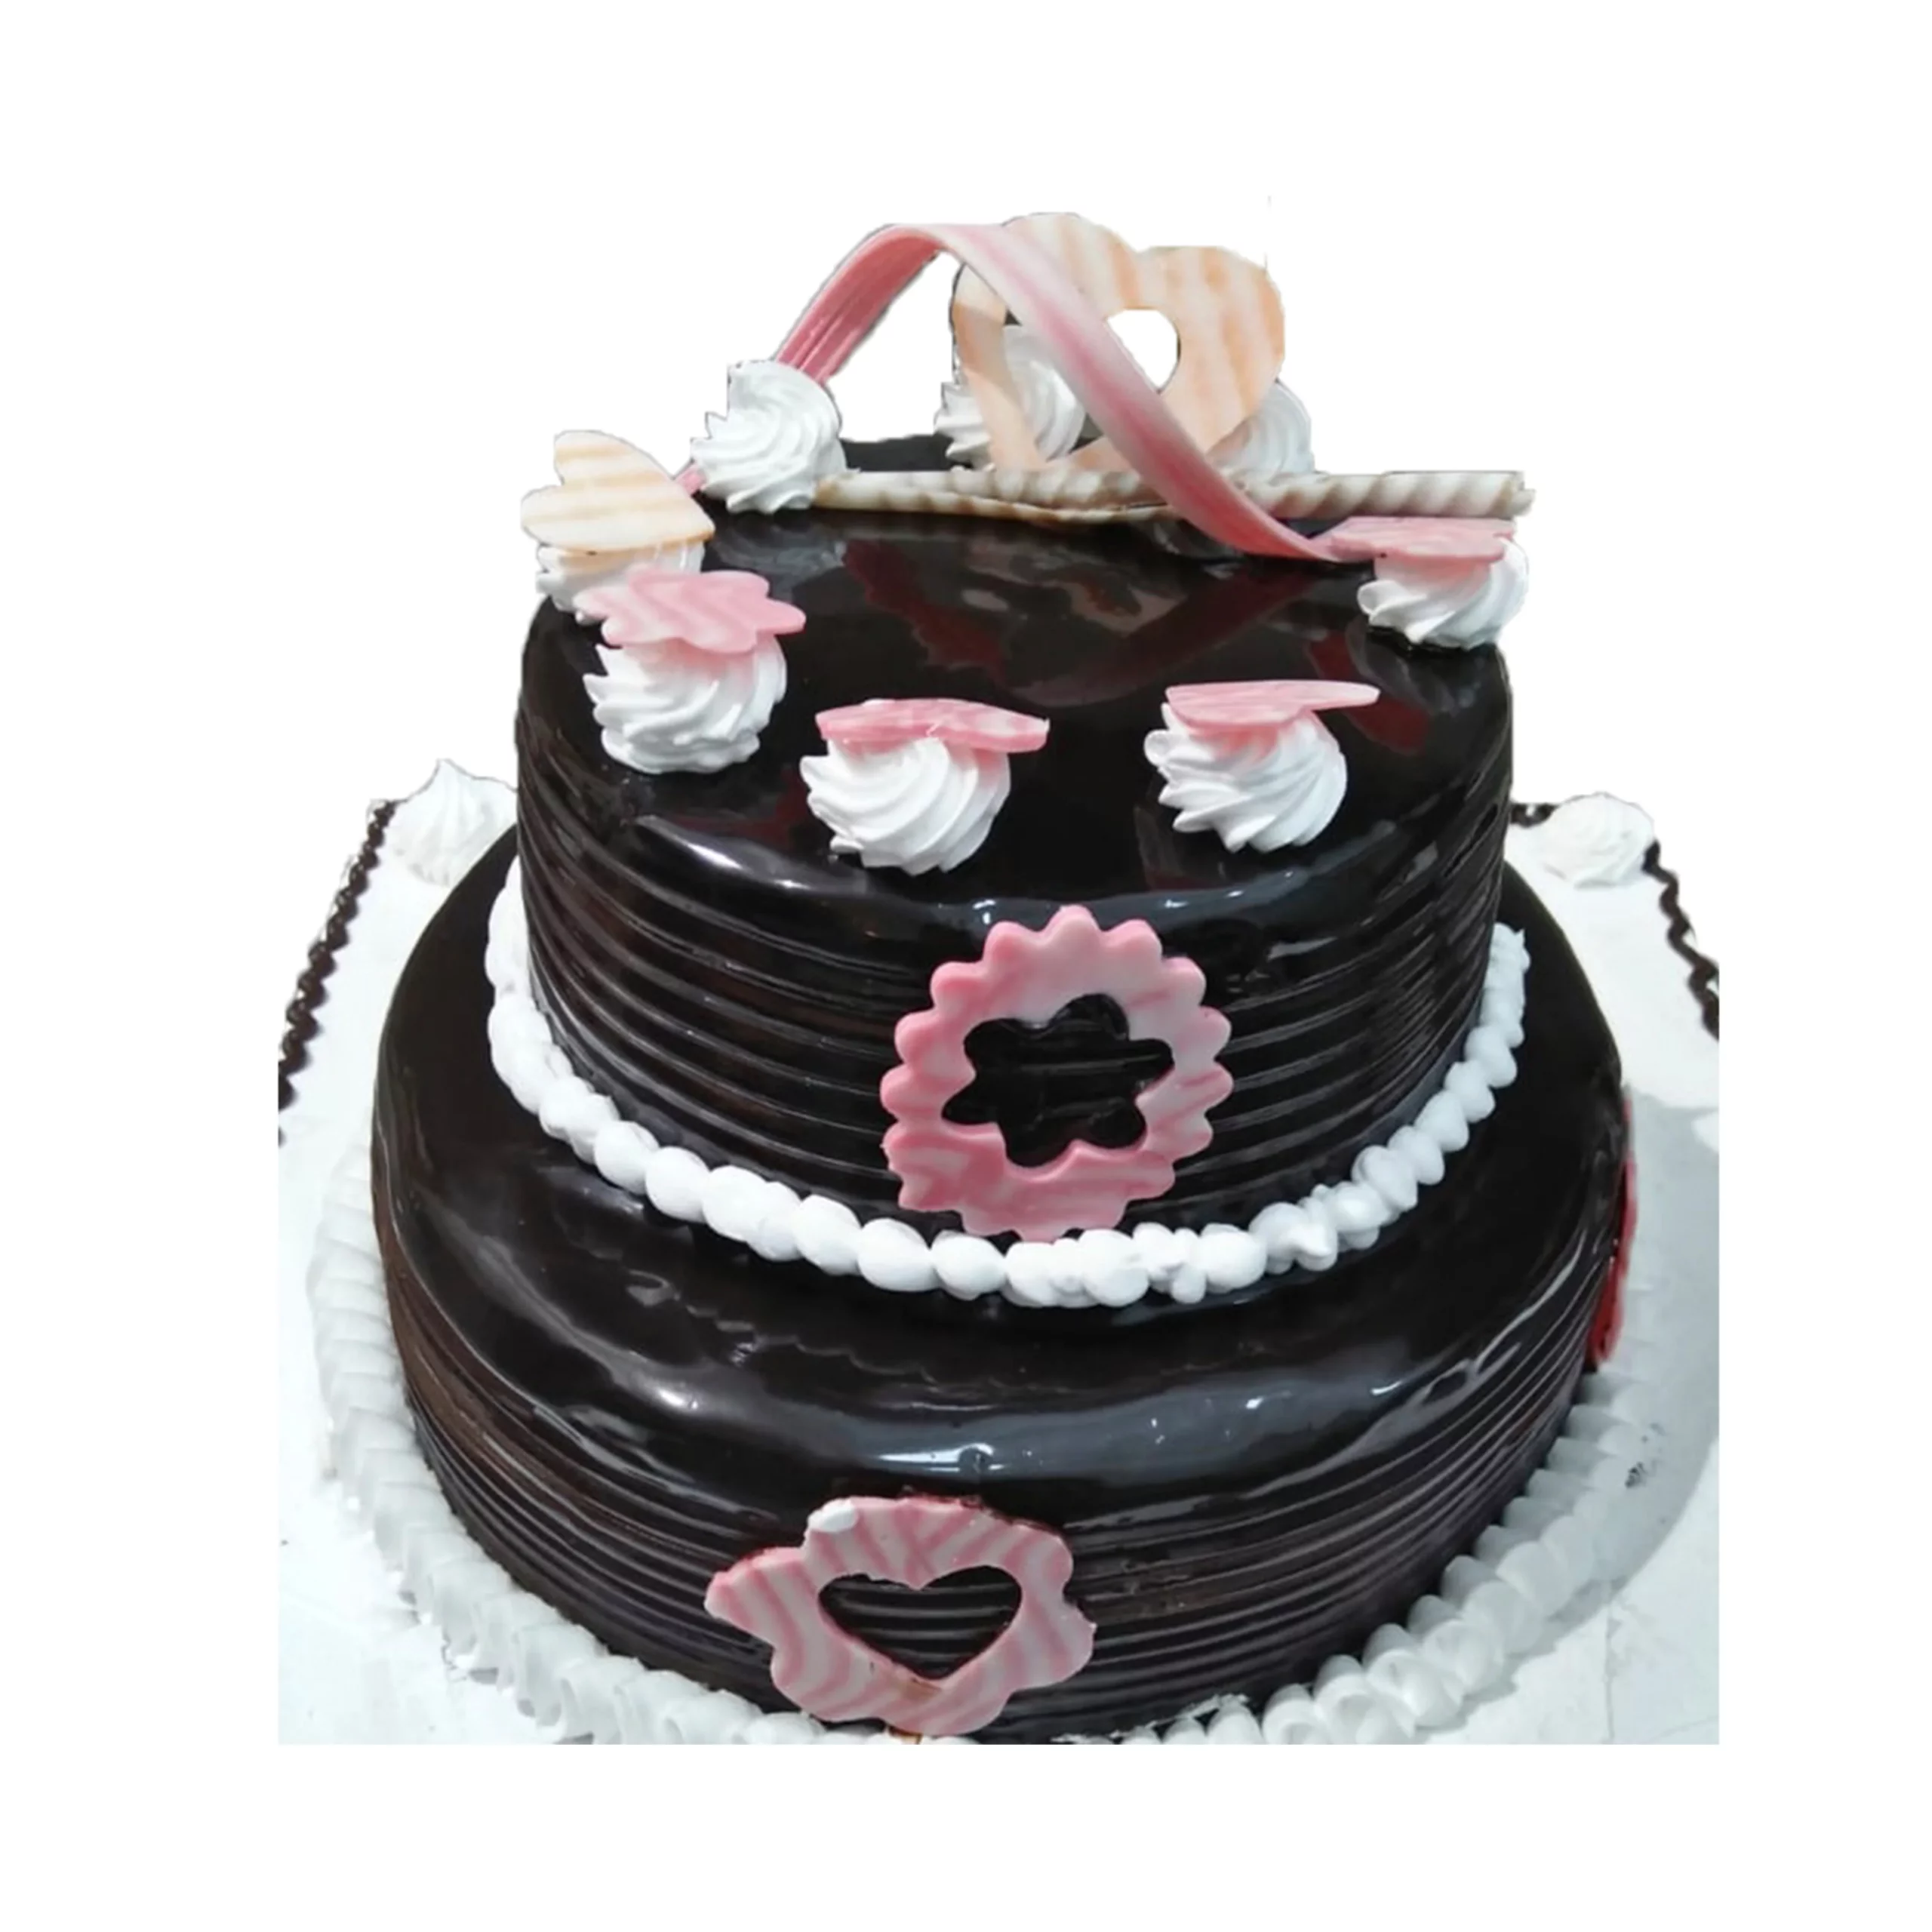 Birthday special pink butterfly cake 3 kg vanilla